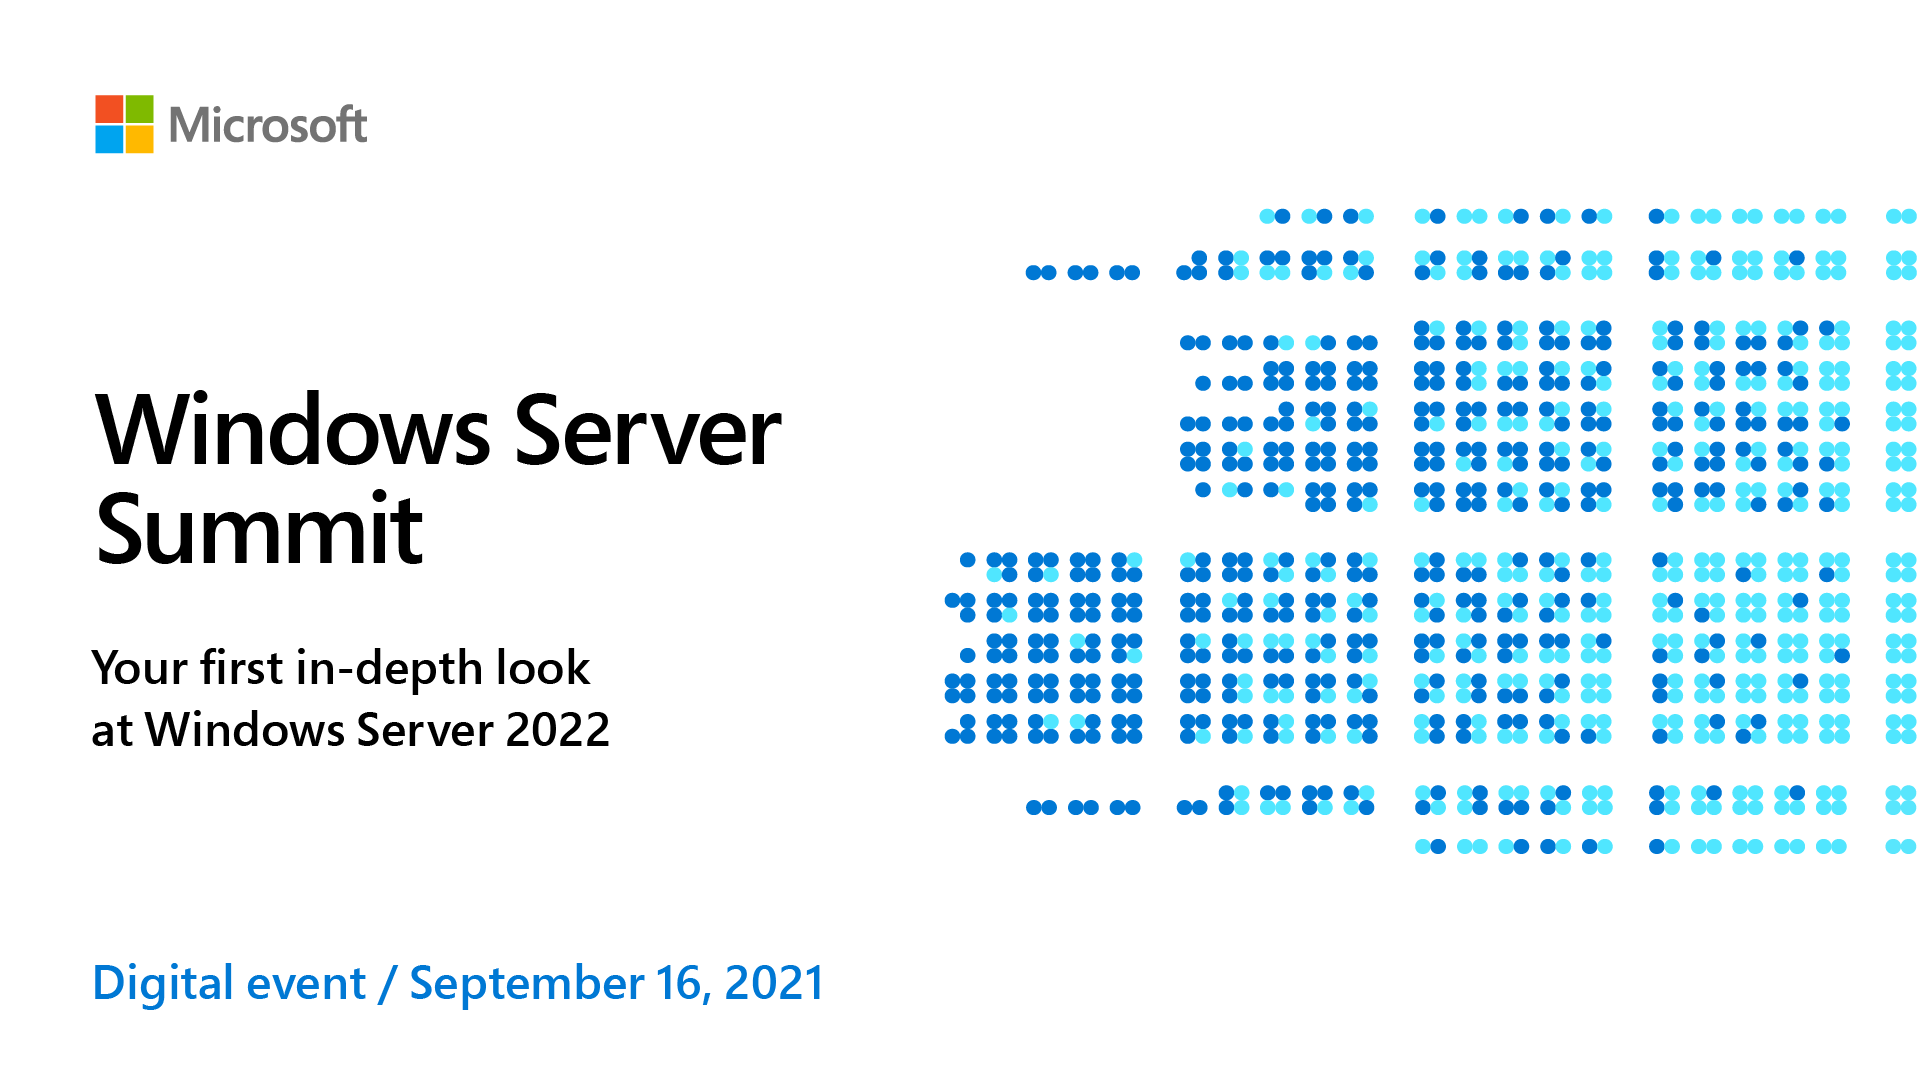 Your first in-depth look at Windows Server 2022 at the Windows Server Summit